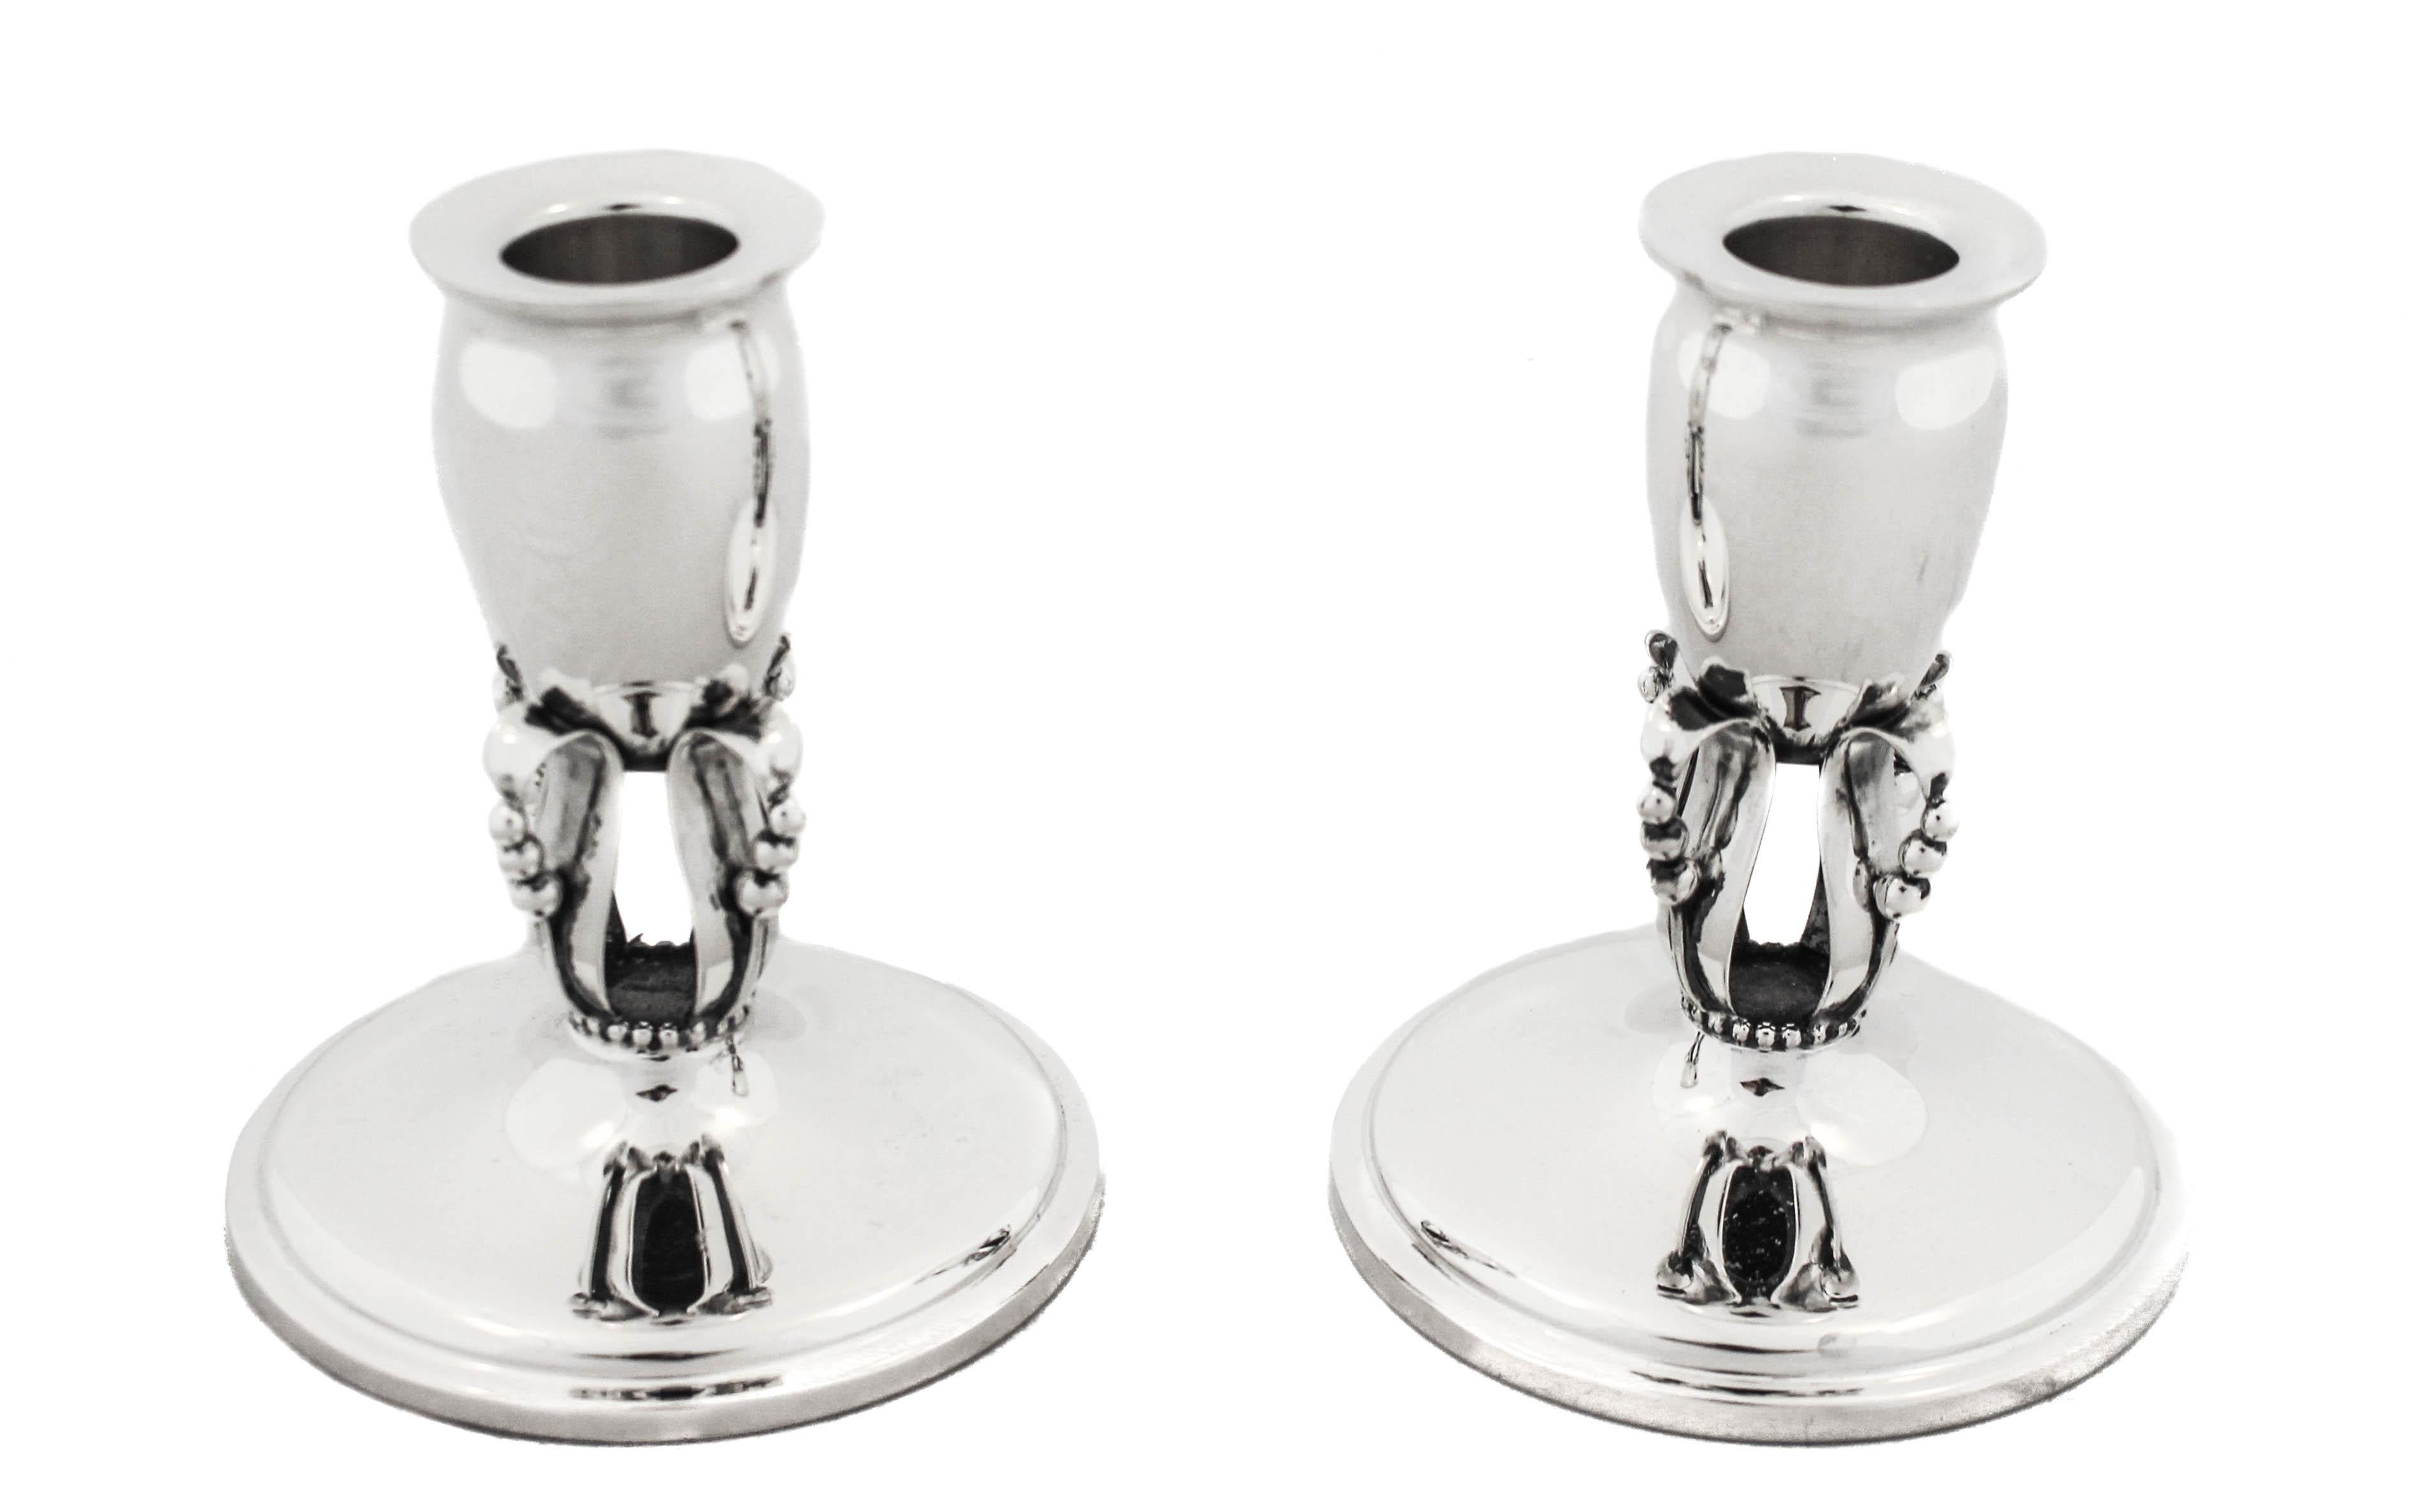 Being offered is a pair of sterling silver Art Deco candlesticks by Mueck Cary Silver.  If you love Art Deco these candlesticks are for you! Understated and elegant, they have a modern shape with four beaded rings beneath each holder.  They are not